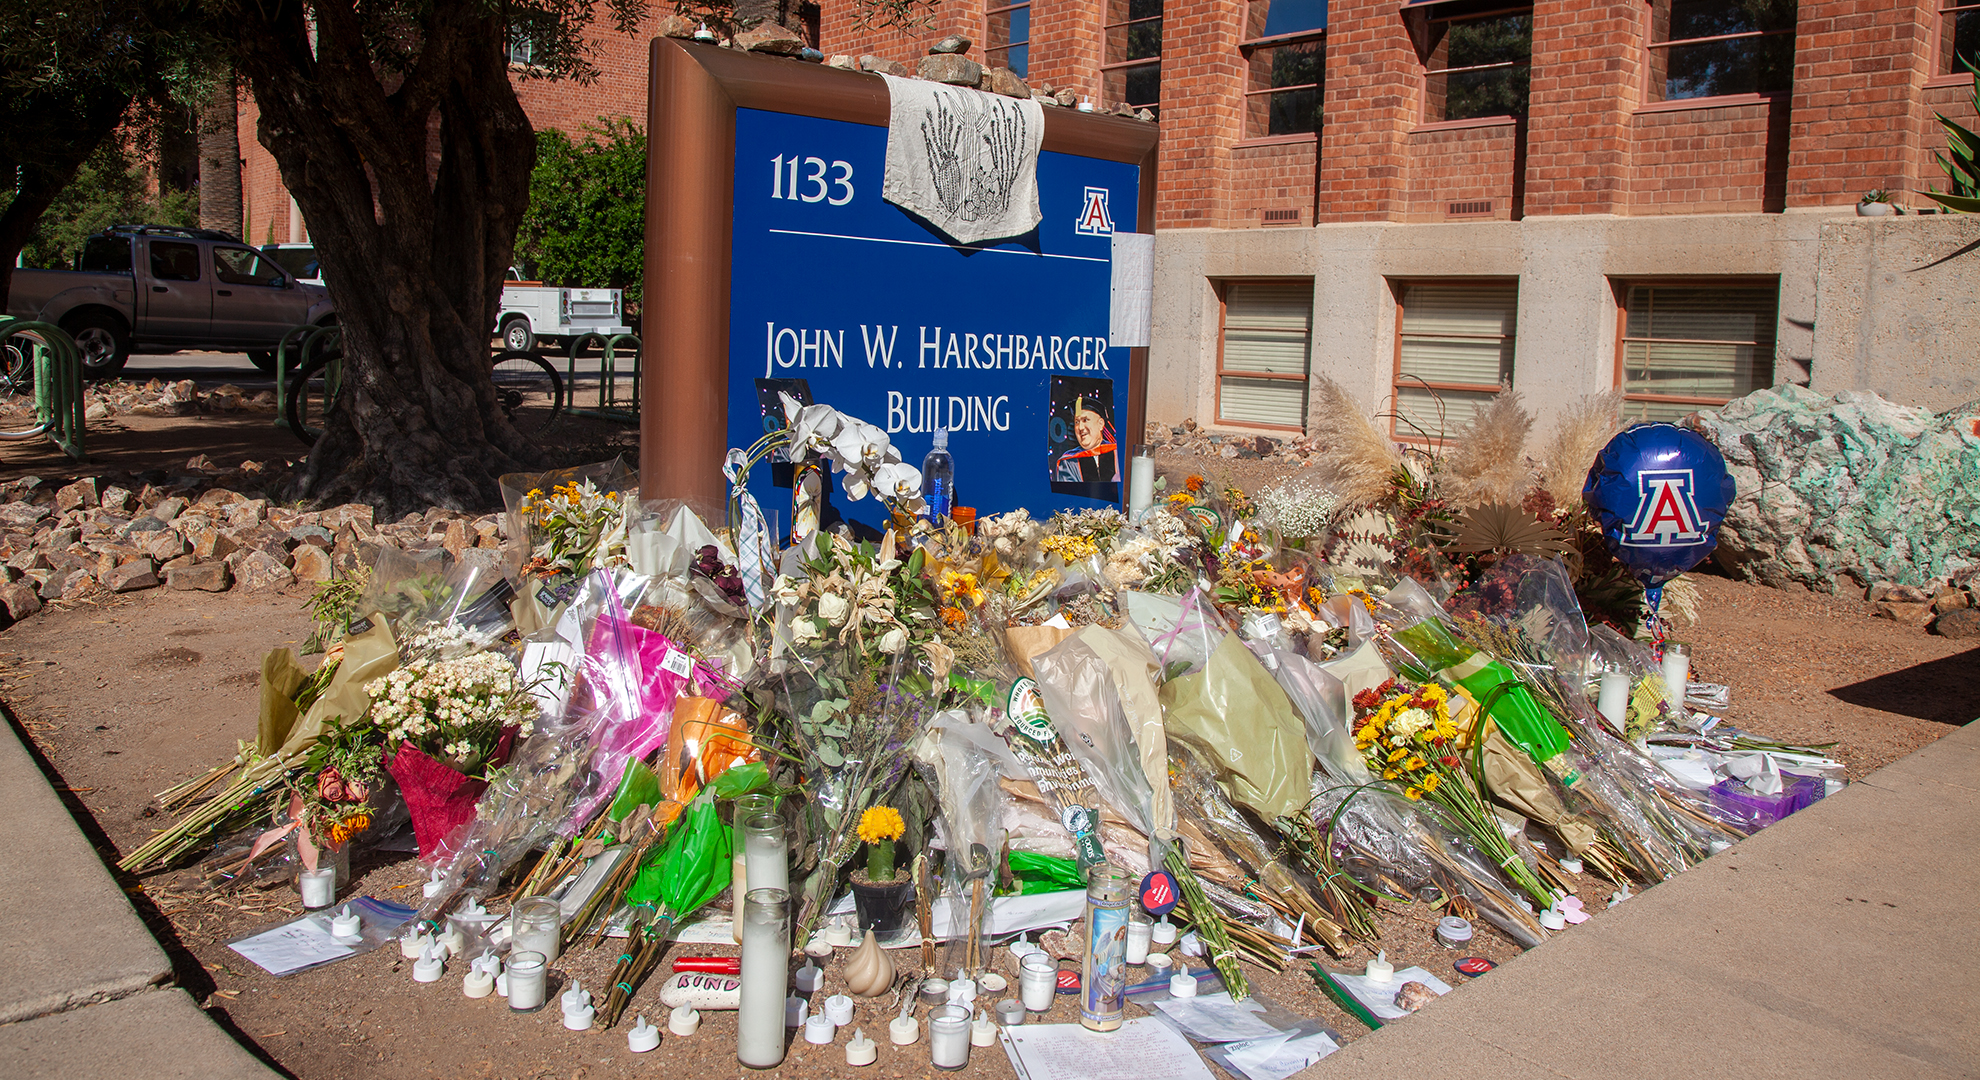 Flowers, candles and letters lay in front of the Harshbarger building sign following the murder of Professor Thomas Meixner on Wed. Oct. 5, 2022 at the University of Arizona. Meixner was killed by a former student on campus.